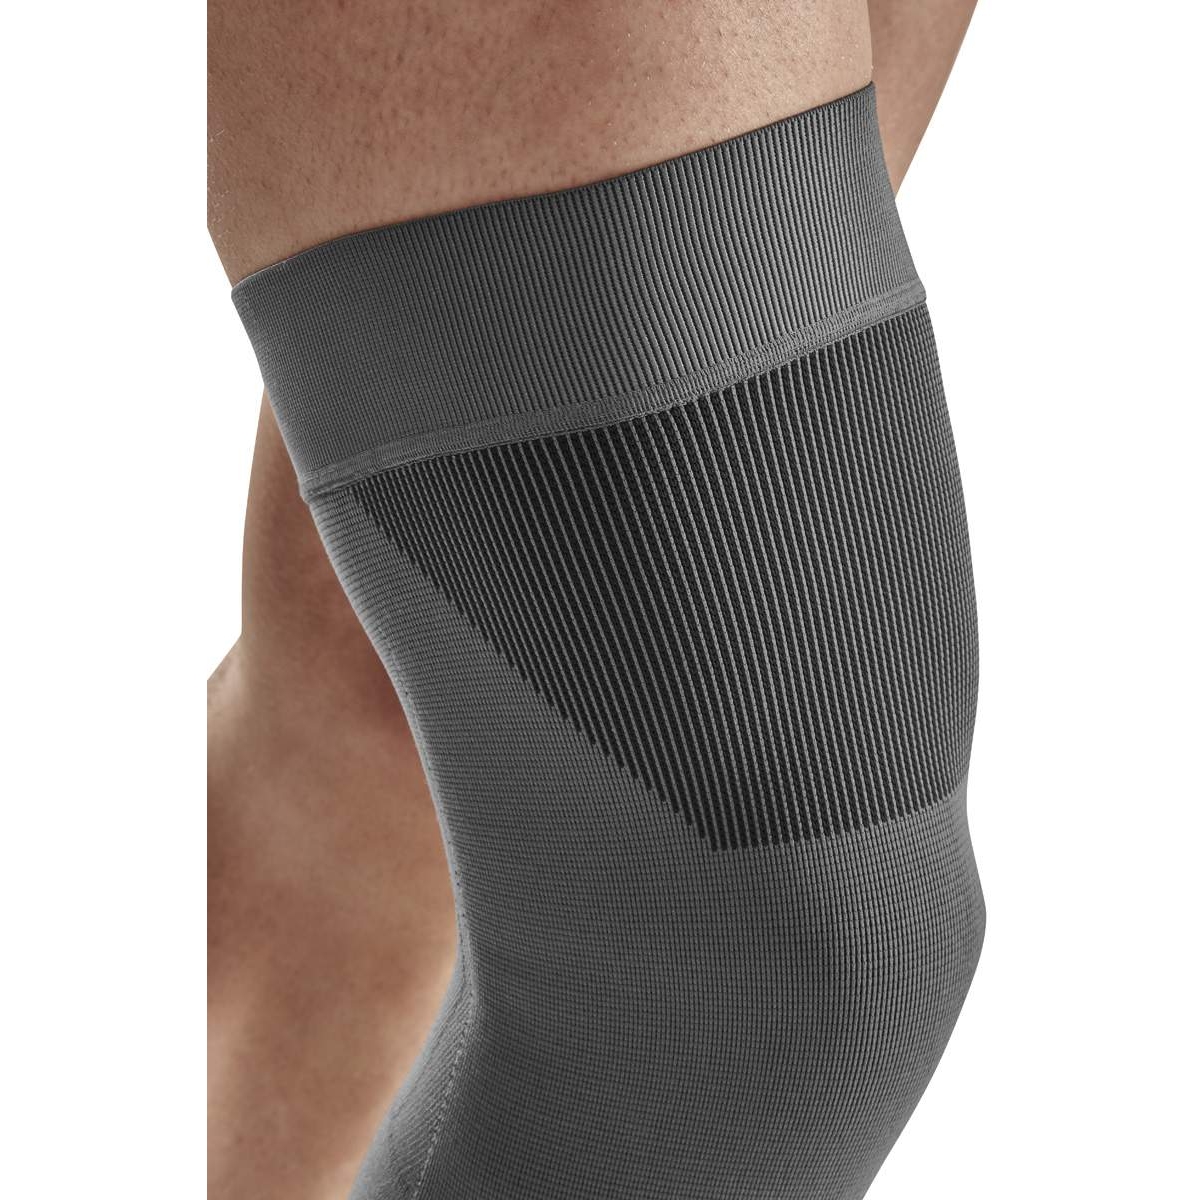 CEP Mid Support Compression Knee Sleeve - grey